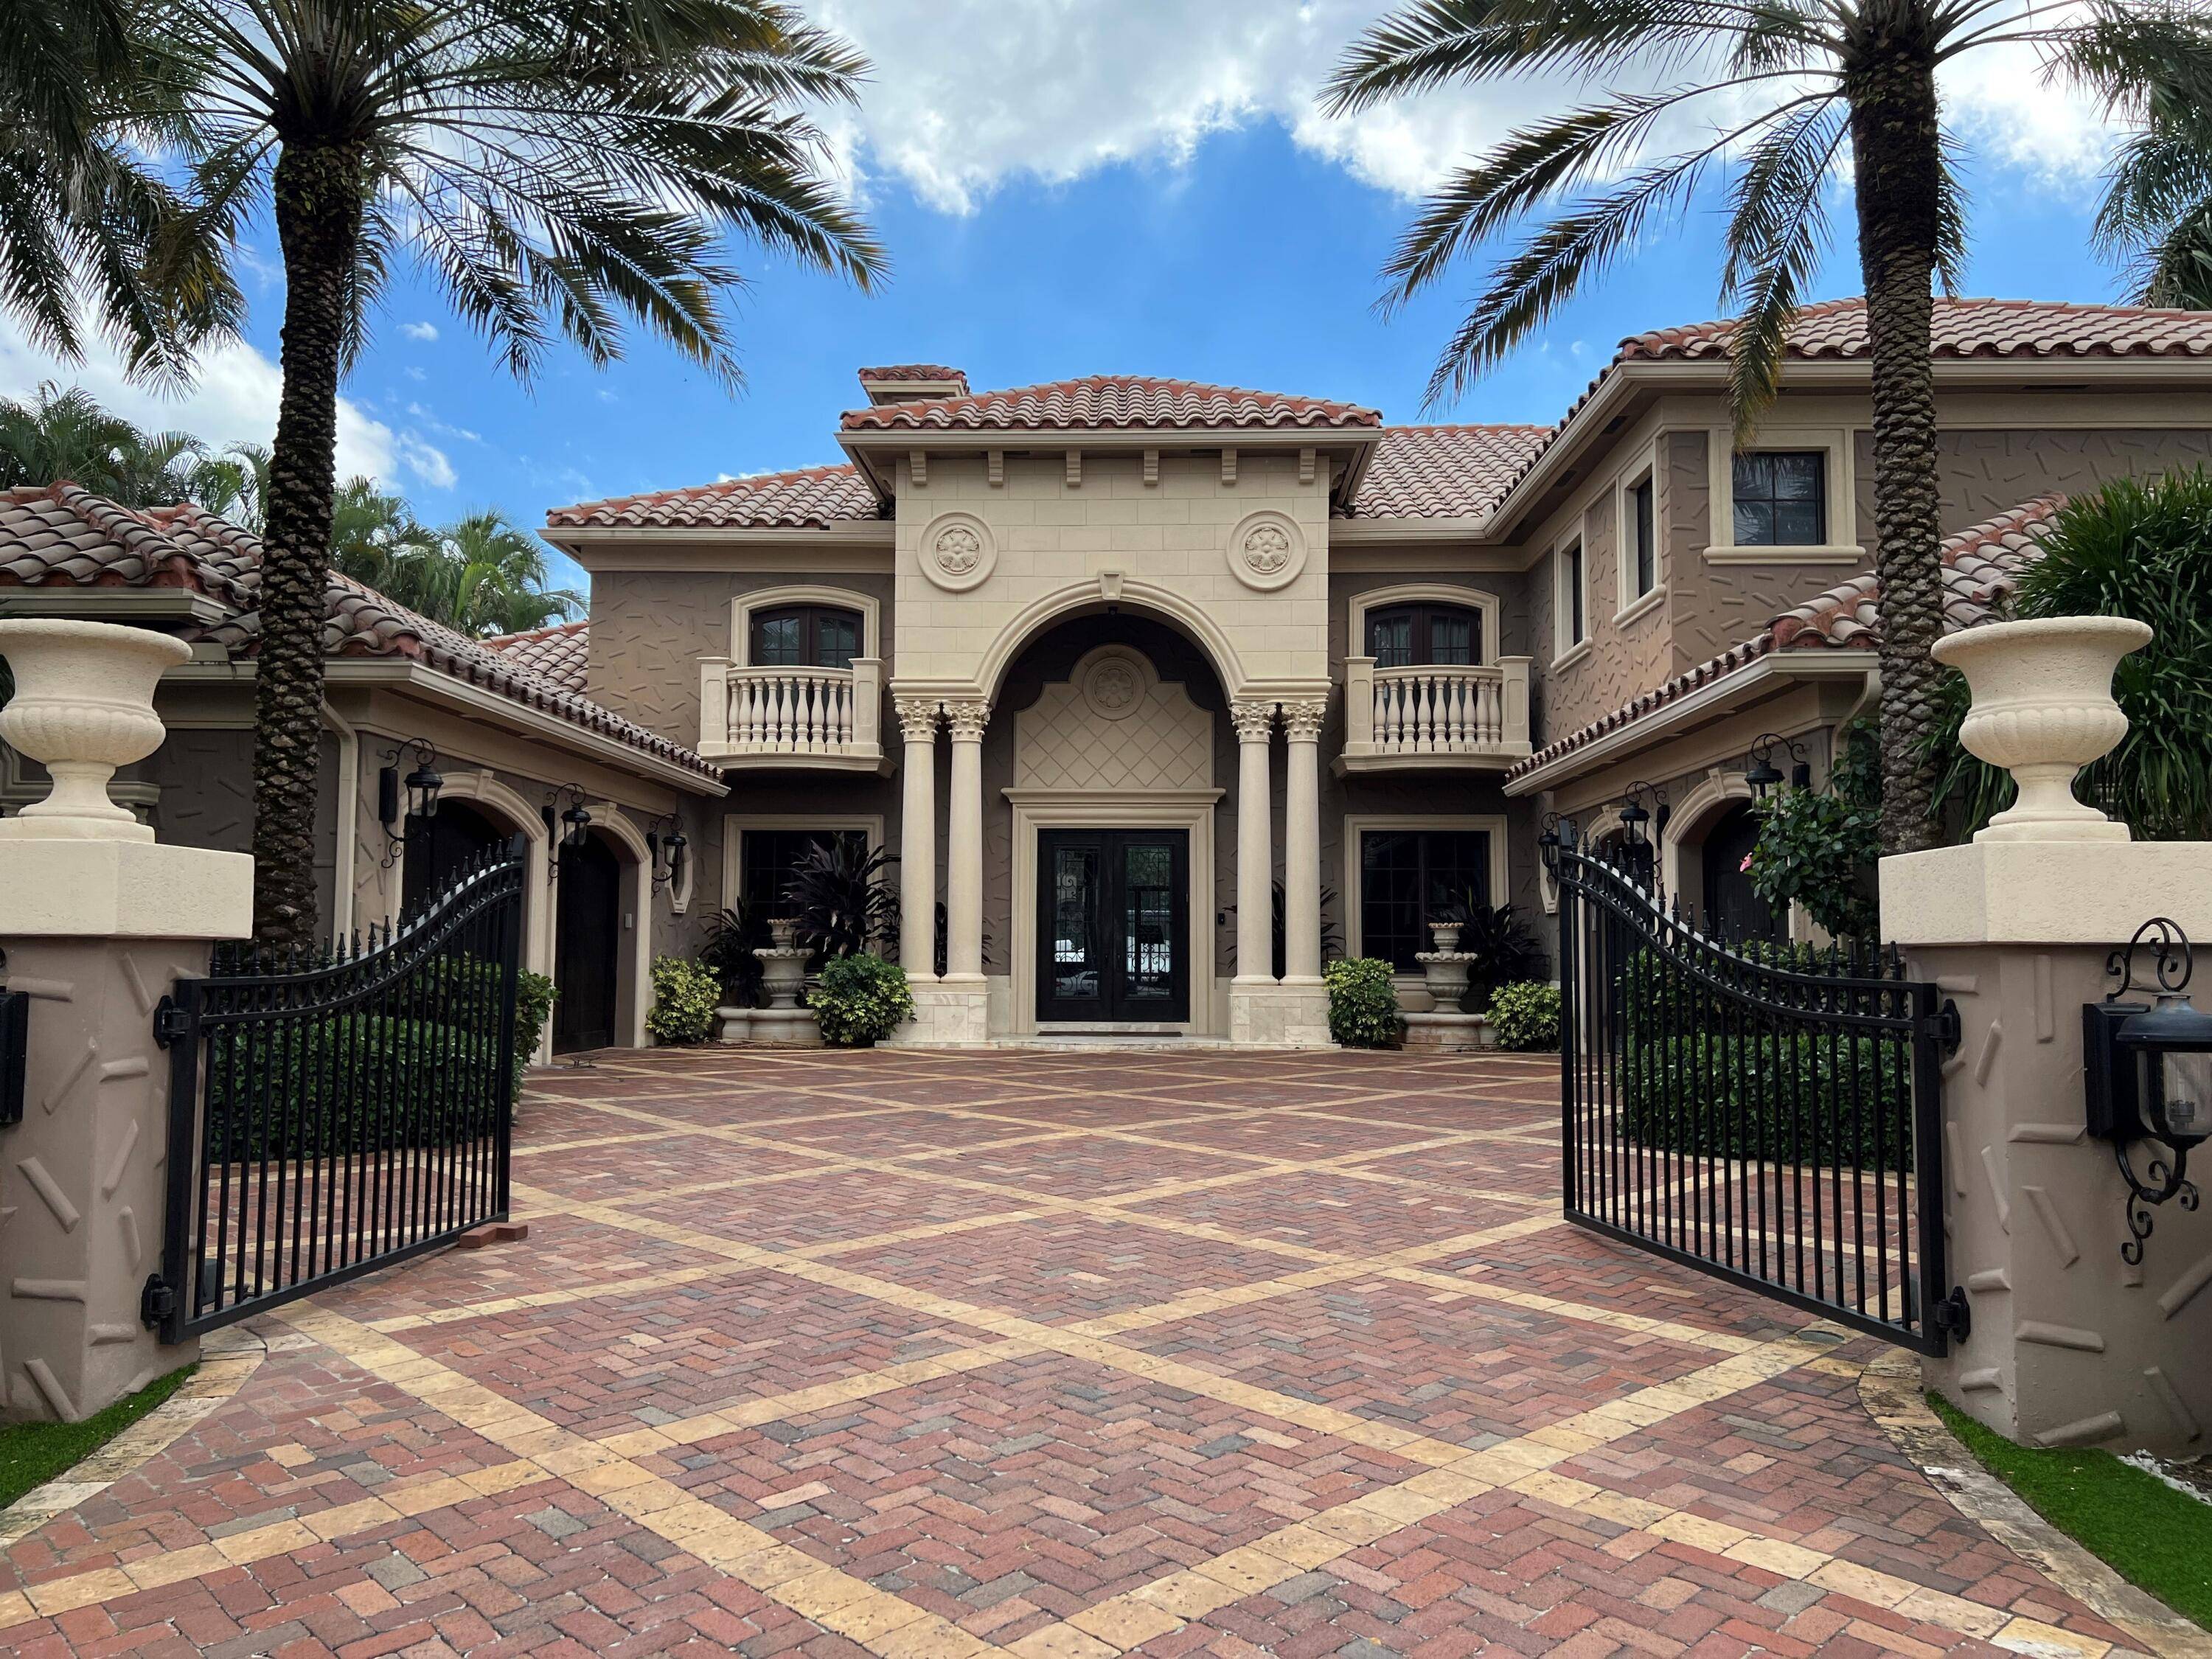 This waterfront property renovated in 2006, located in Royal Palm Yacht Country Club has 6 bedrooms, a first level Primary Suite with dual baths and wardrobes, 7.